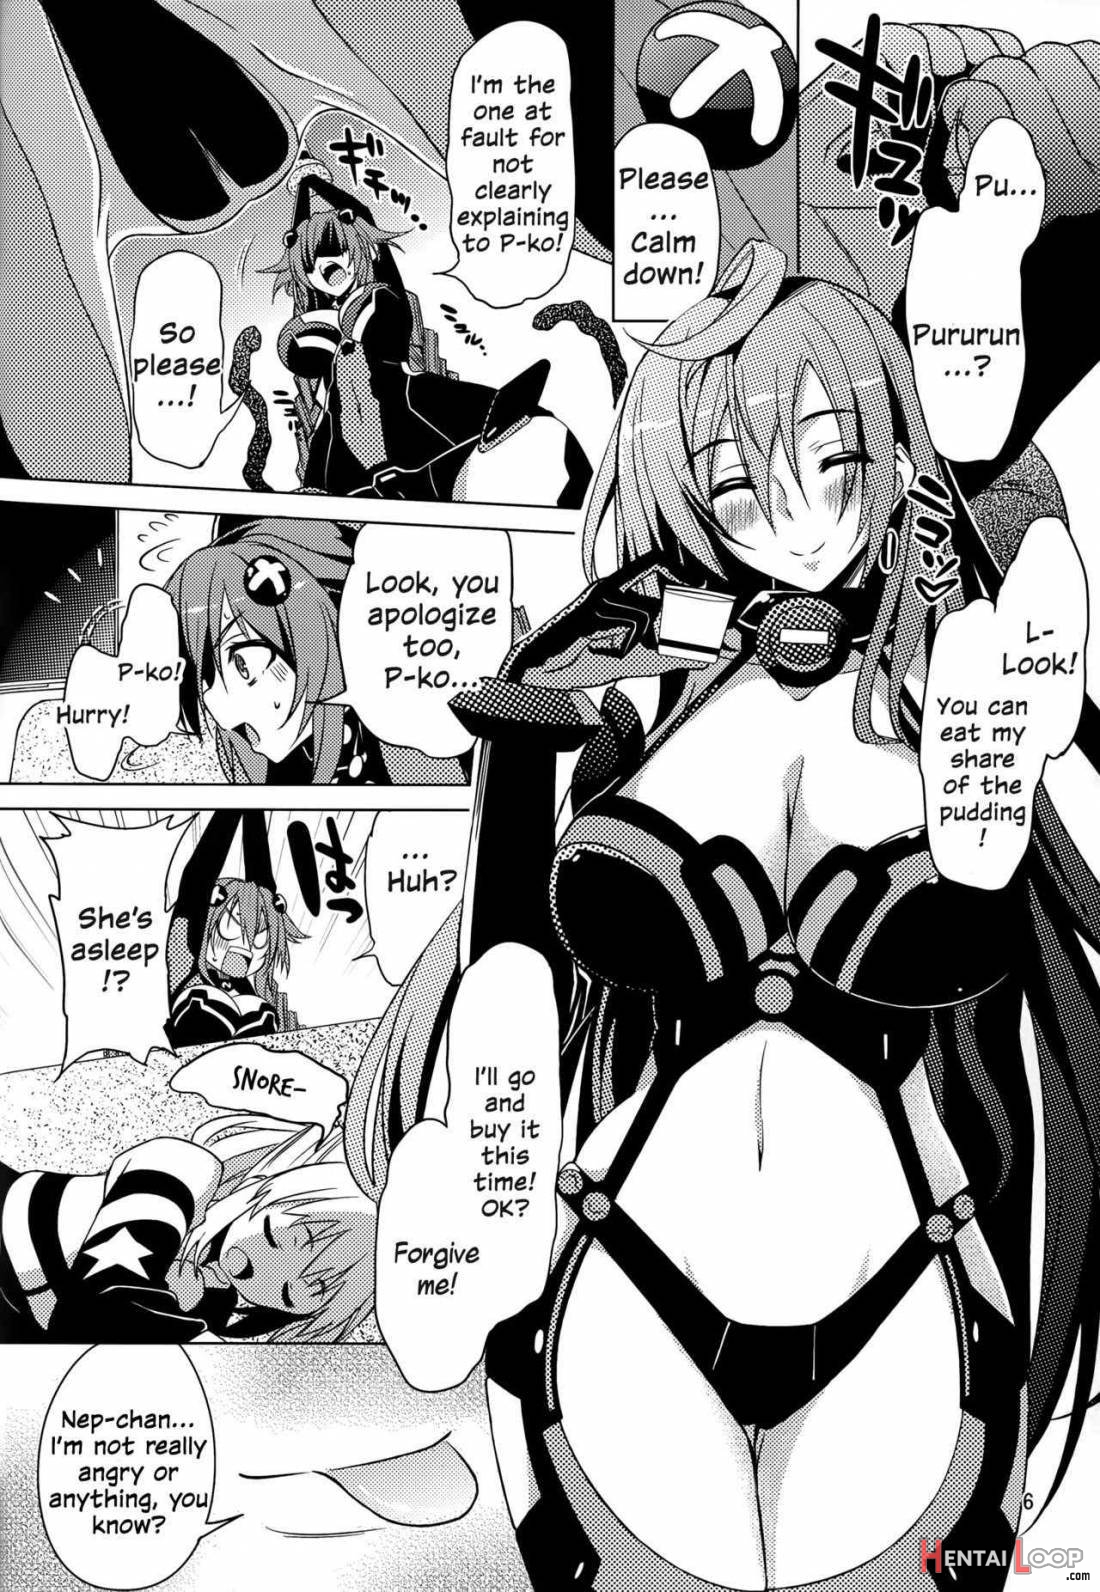 Nepture Breaker 2 page 3